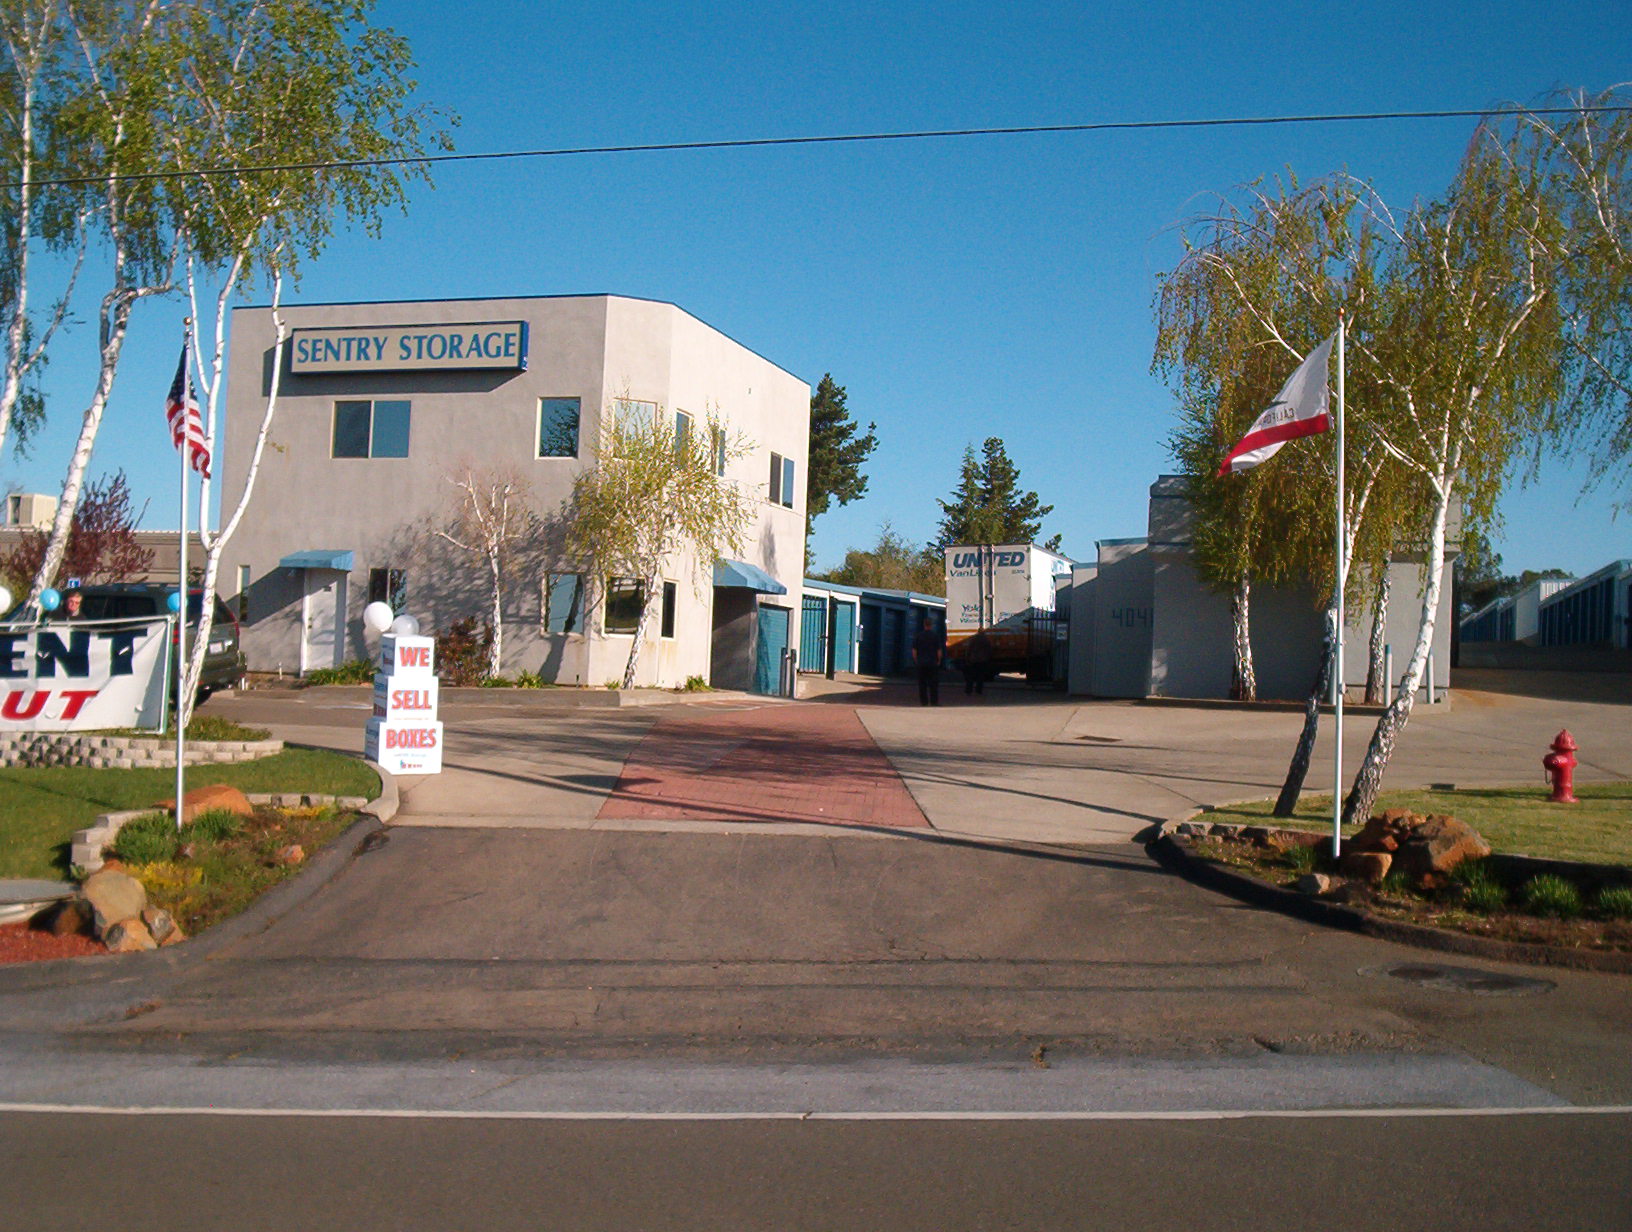 Sentry Storage Facility and Office Entrance on 4041 Wild Chaparral Dr